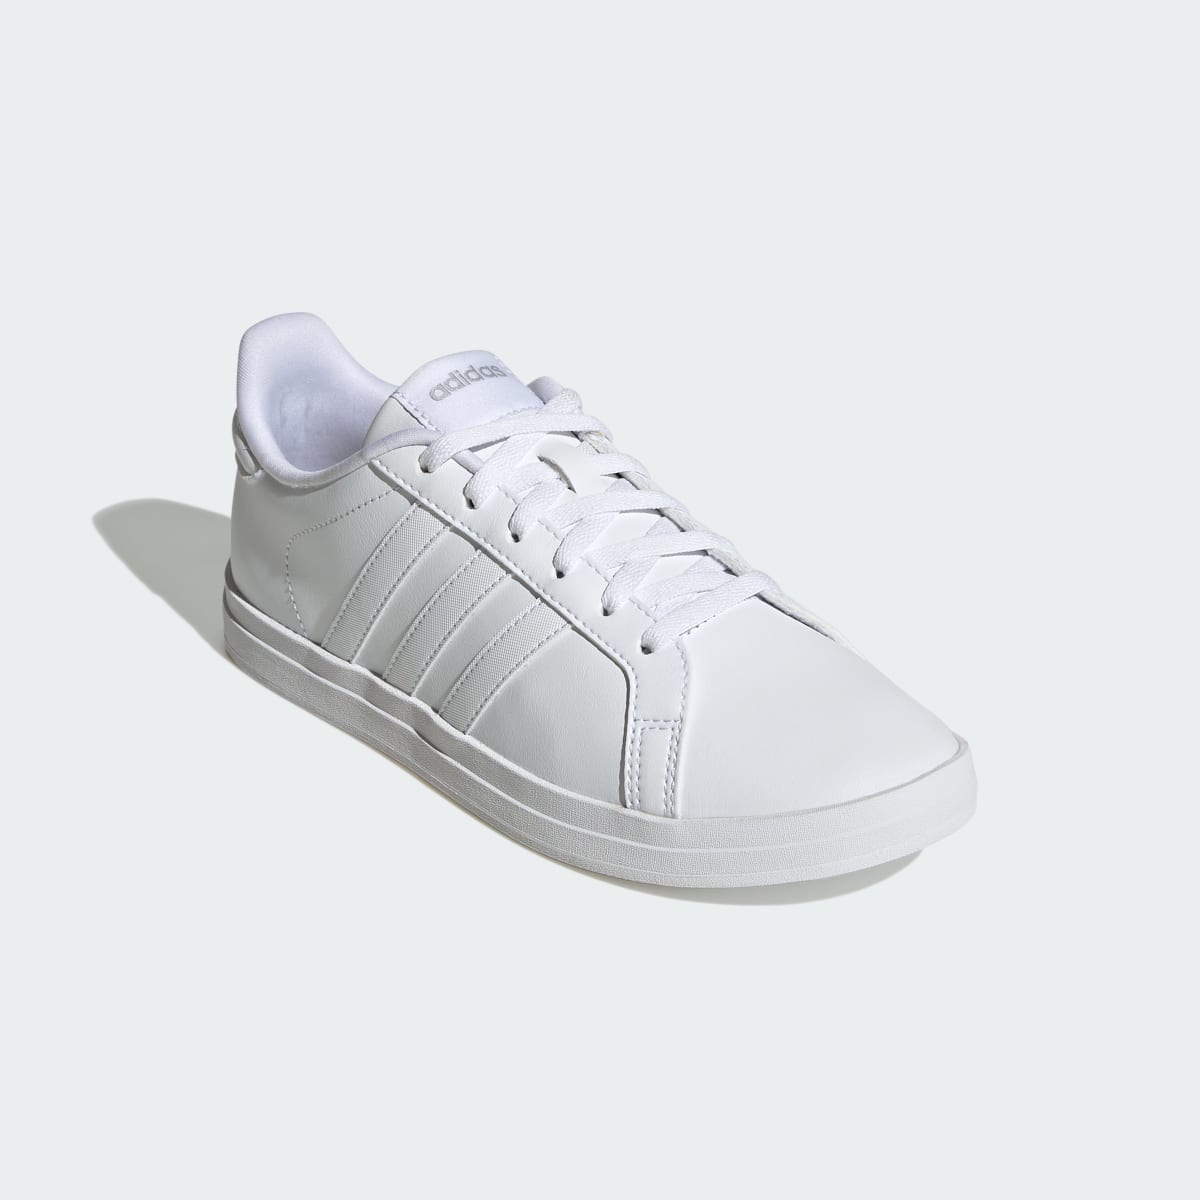 Adidas Courtpoint X Shoes. 5